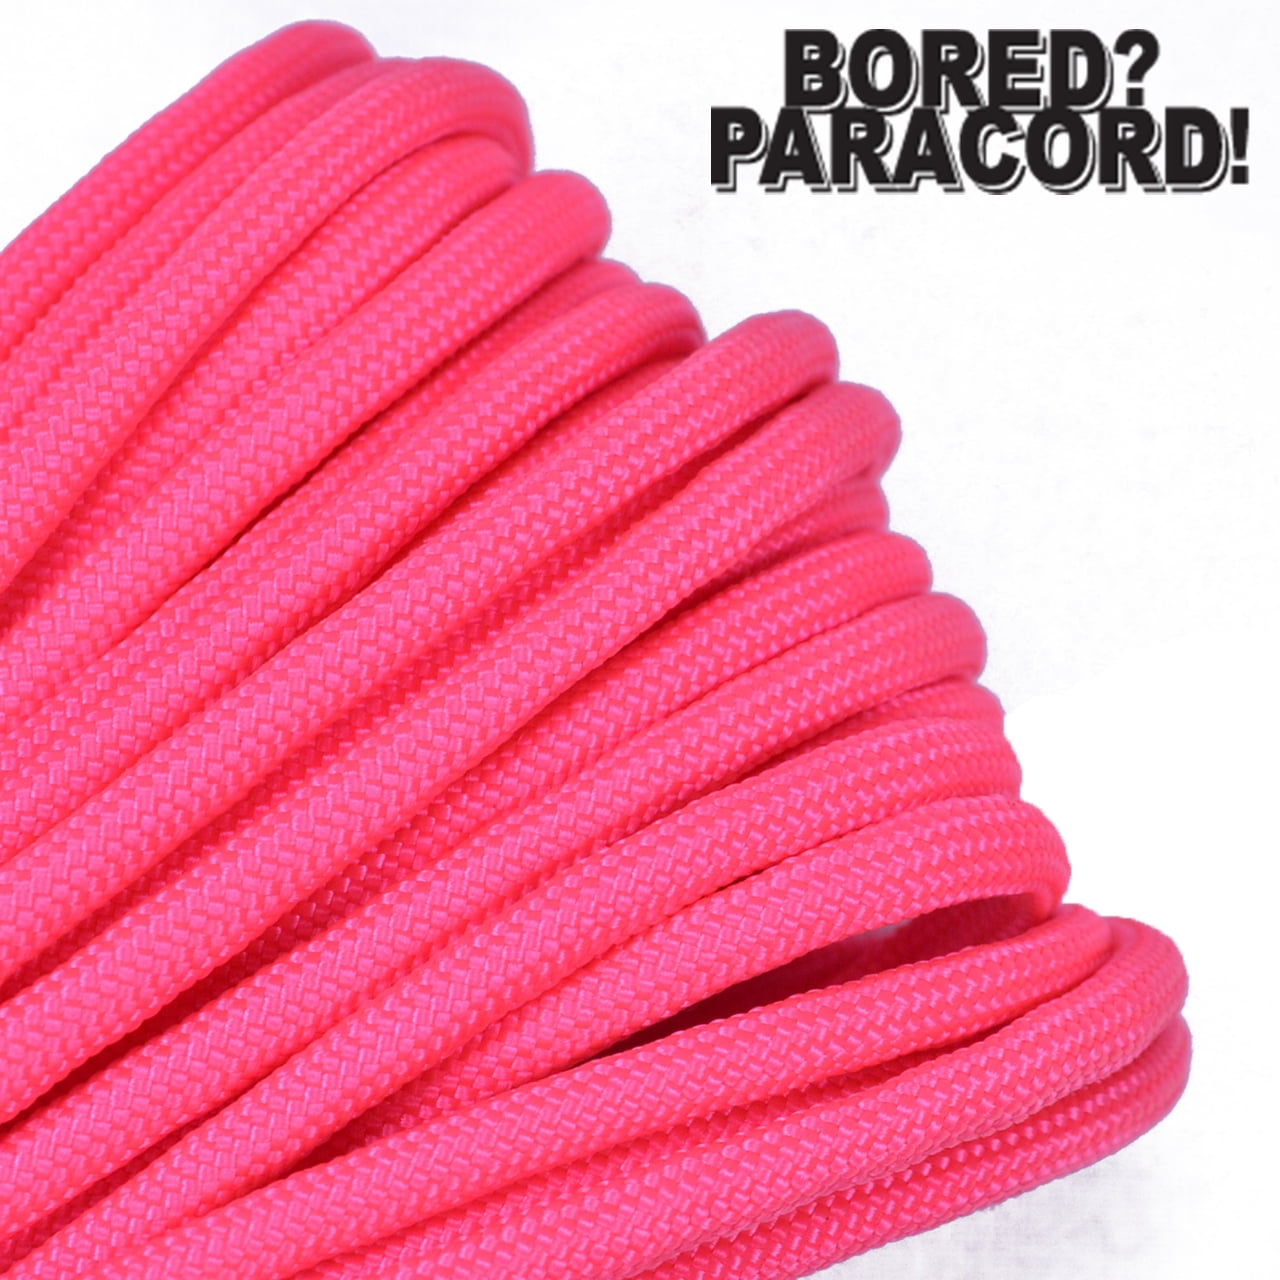 Bored Paracord Brand 550 lb Type III Paracord - Think Pink 100 Feet, White